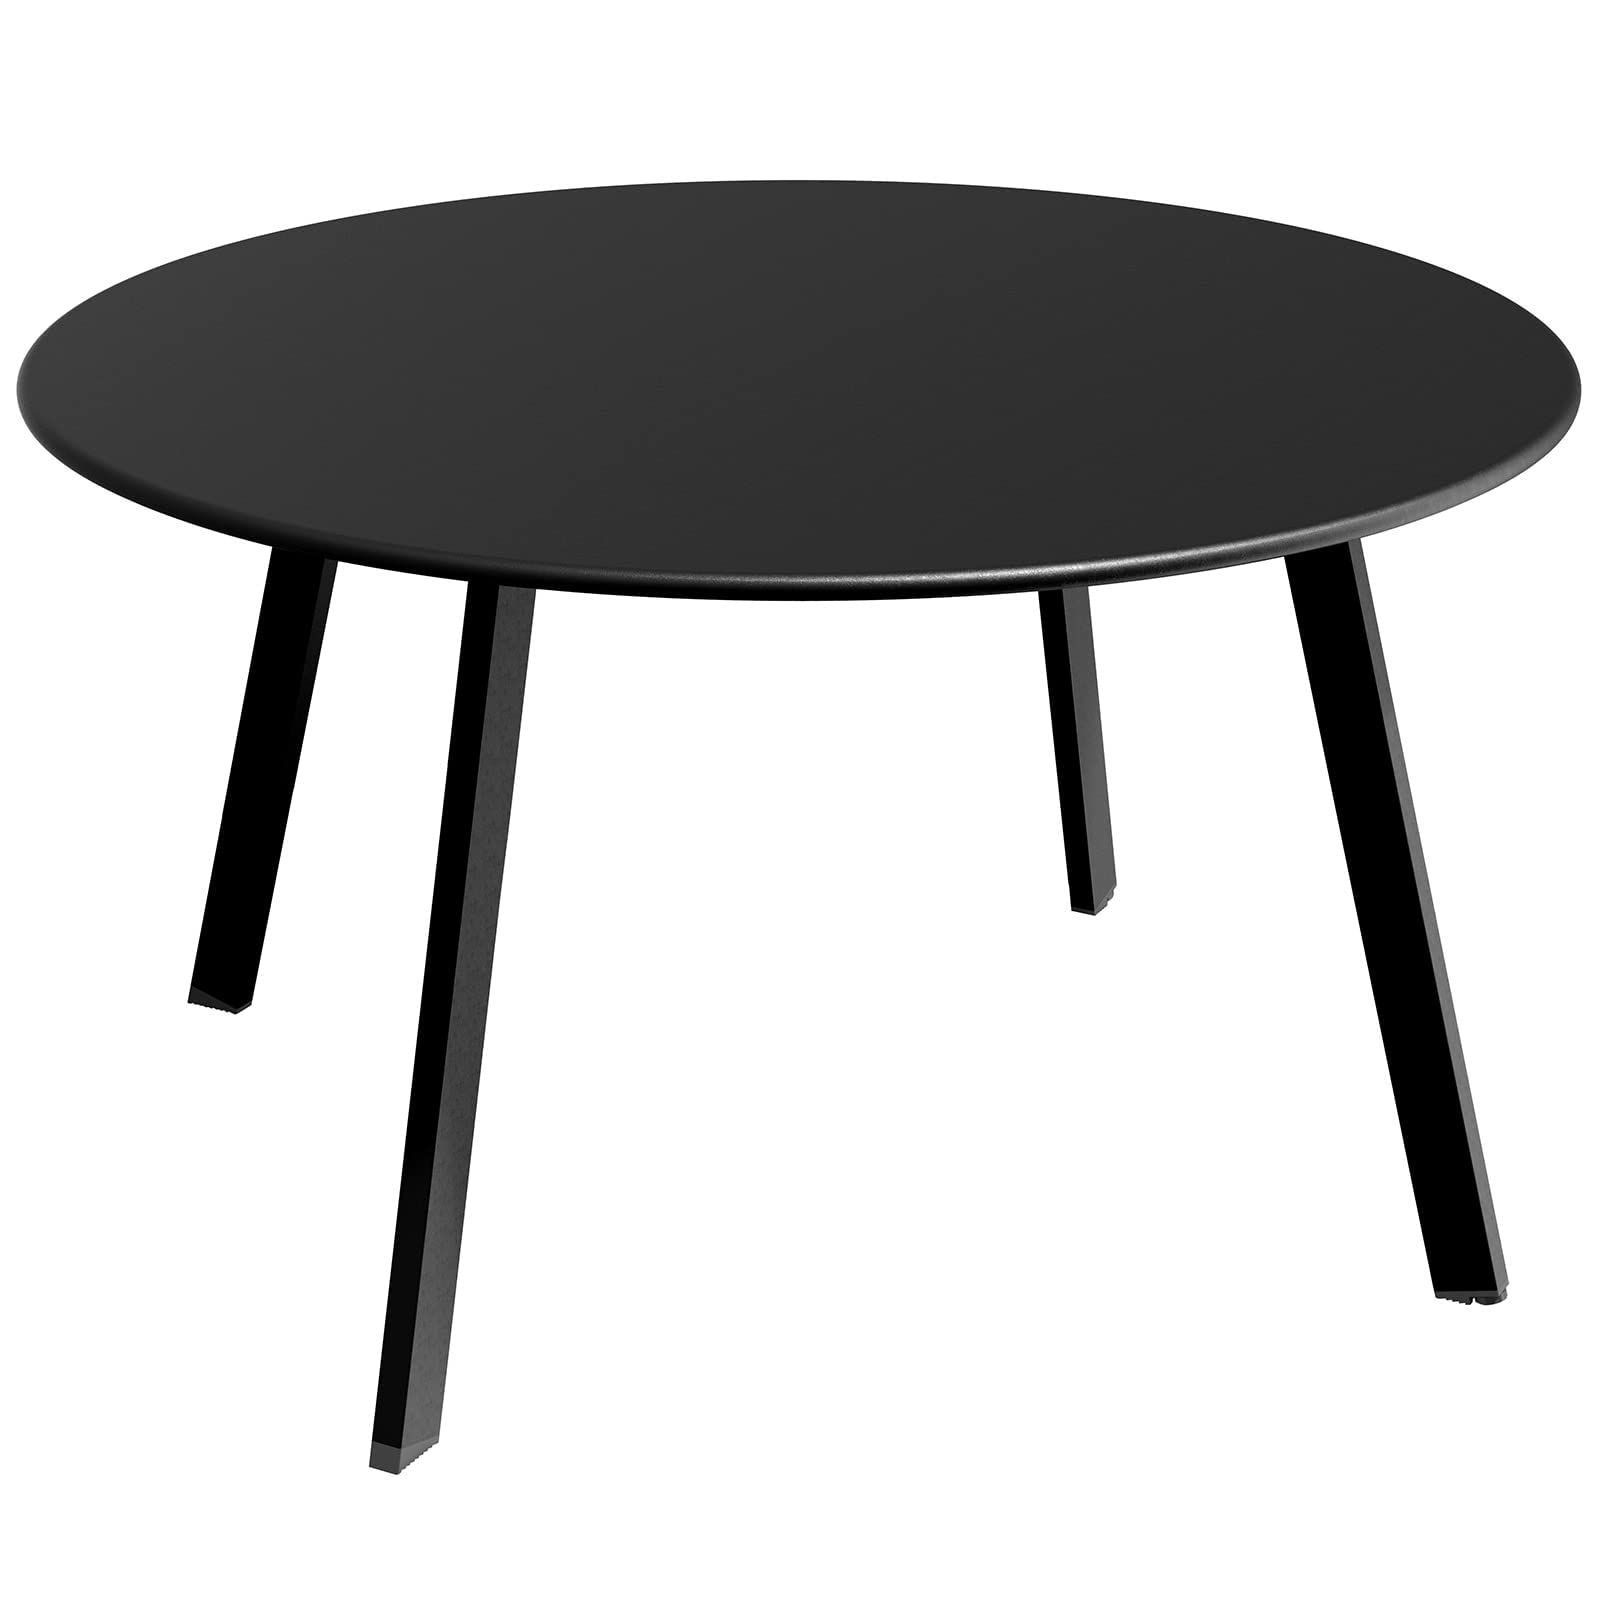 Round Steel Patio Coffee Tables In Most Recently Released Amazon: Grand Patio Round Steel Patio Coffee Table, Weather Resistant  Outdoor Large Side Table,( Black, 1 Pc) : Patio, Lawn & Garden (Photo 2 of 10)